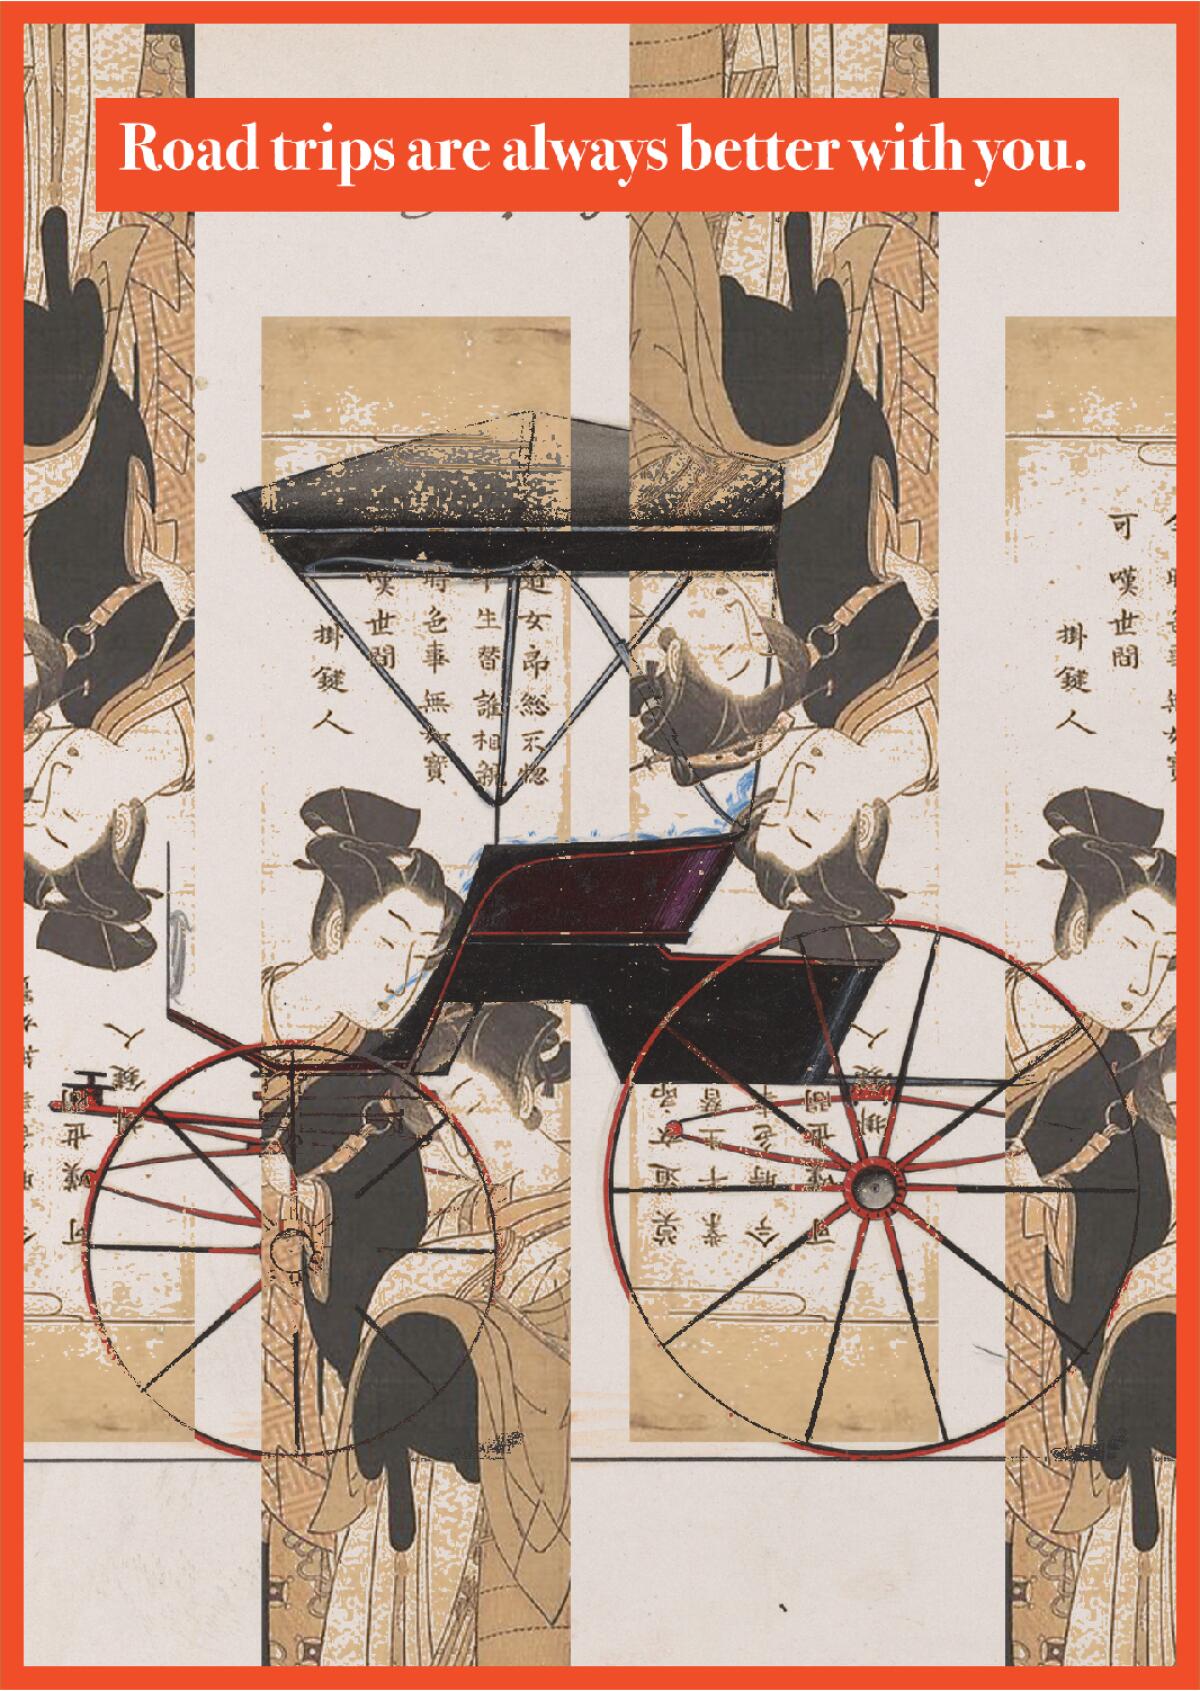 Collage featuring Isoda Koryūsai's "Lovers" & Brewster & Co.'s carriage with phrase "Road trips are always better with you."